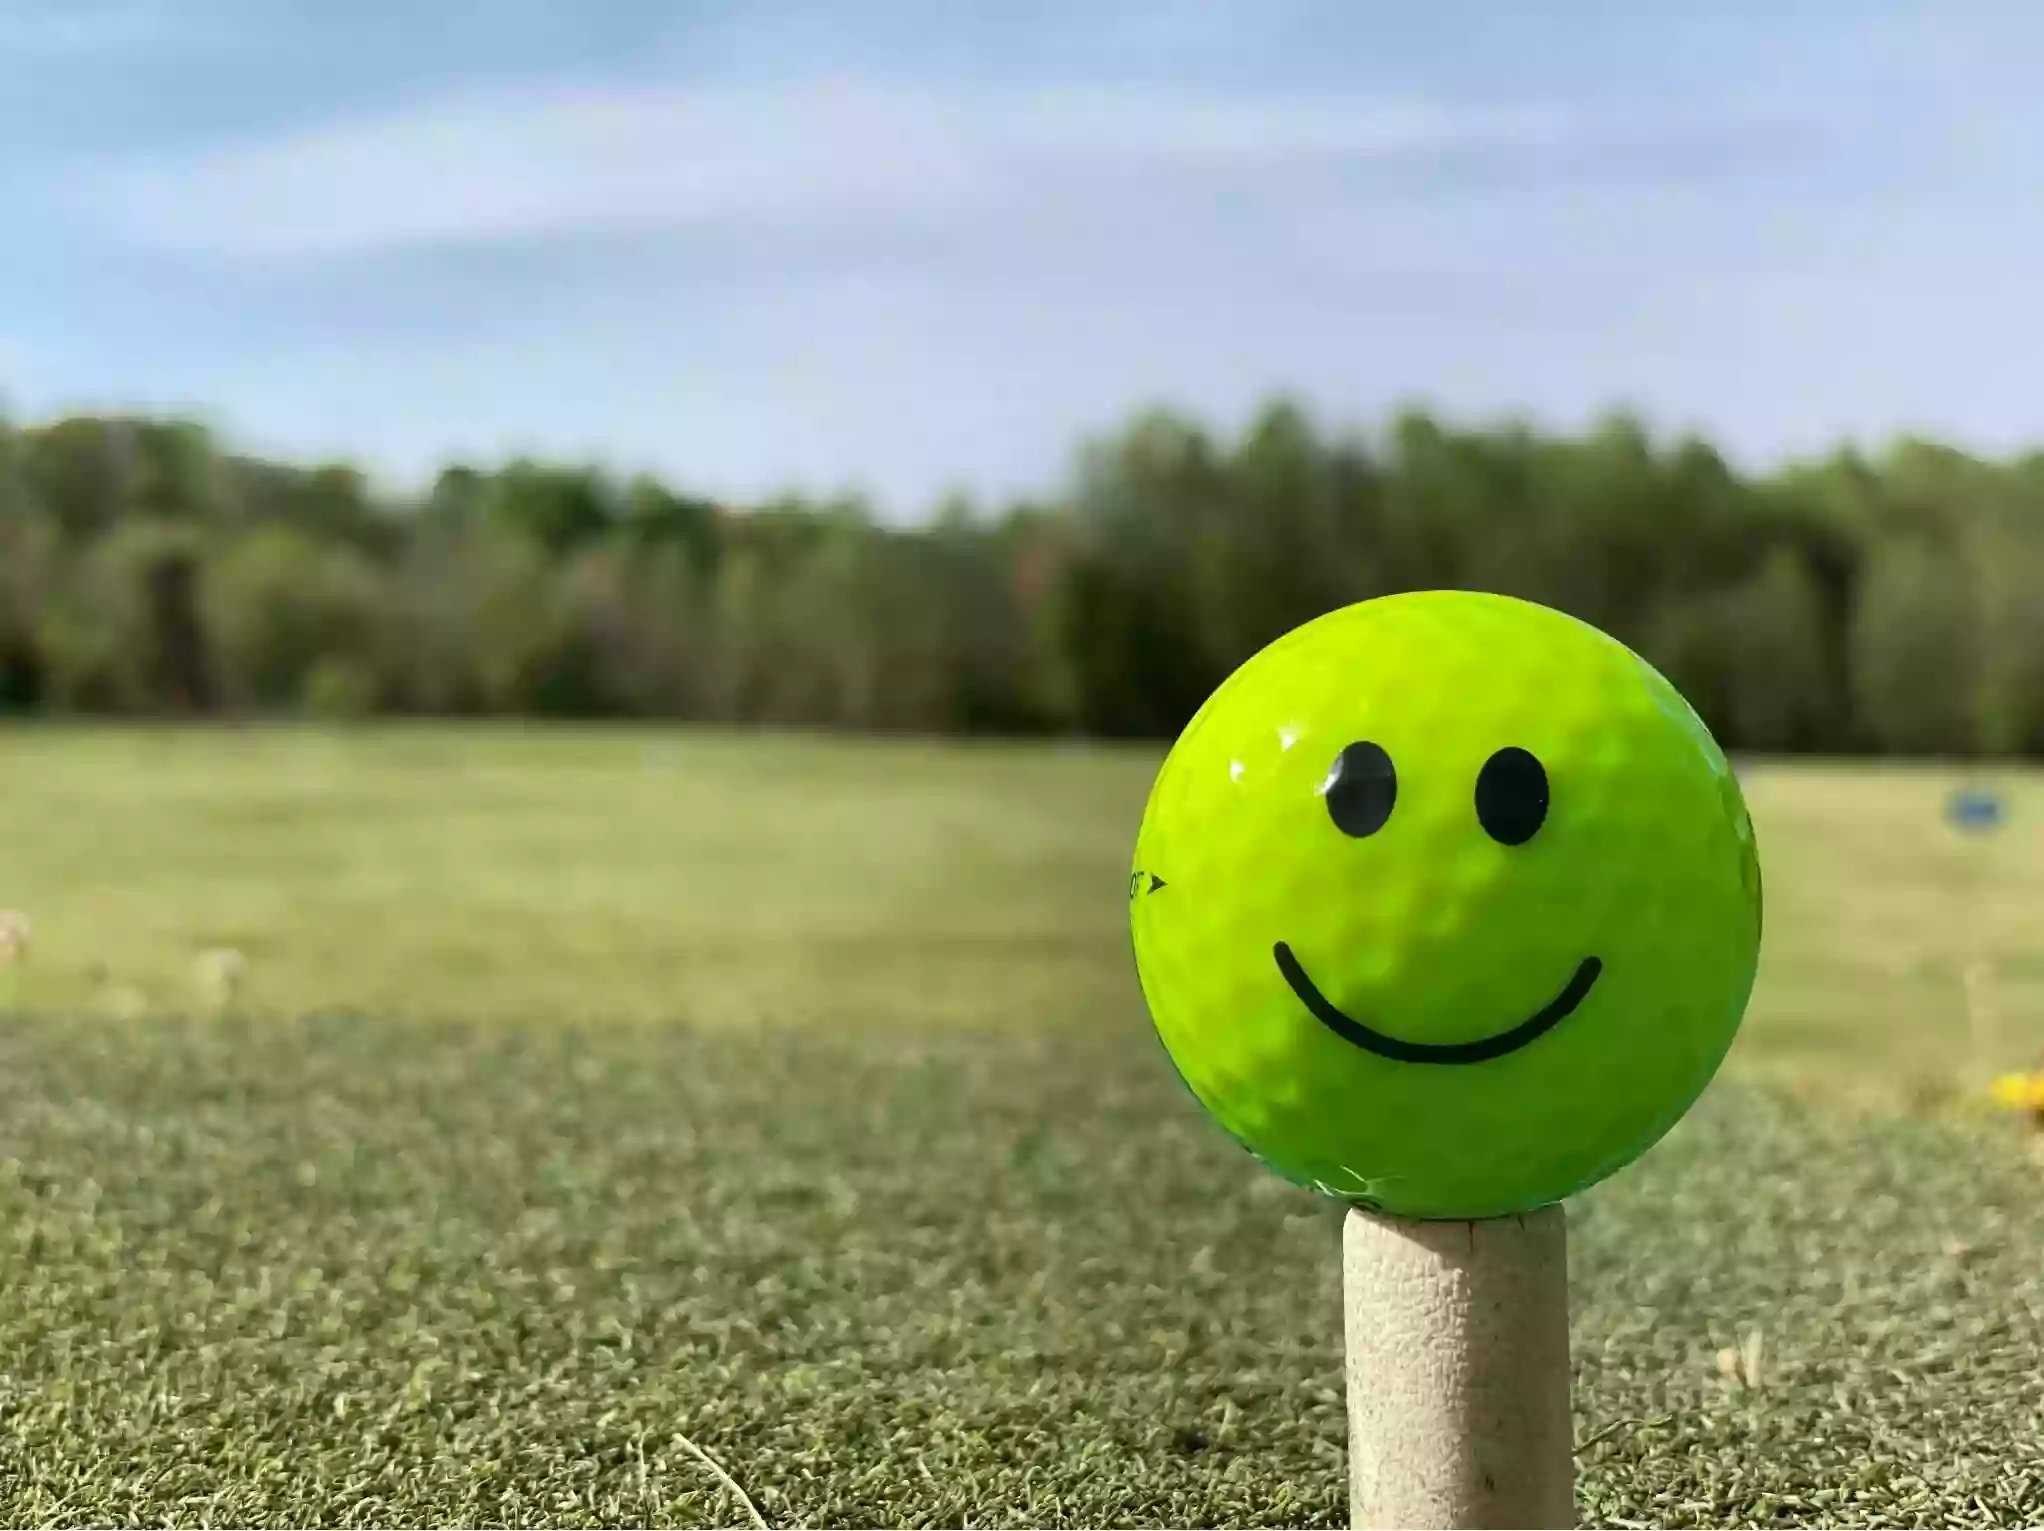 Smiley's Golf and Learning Center